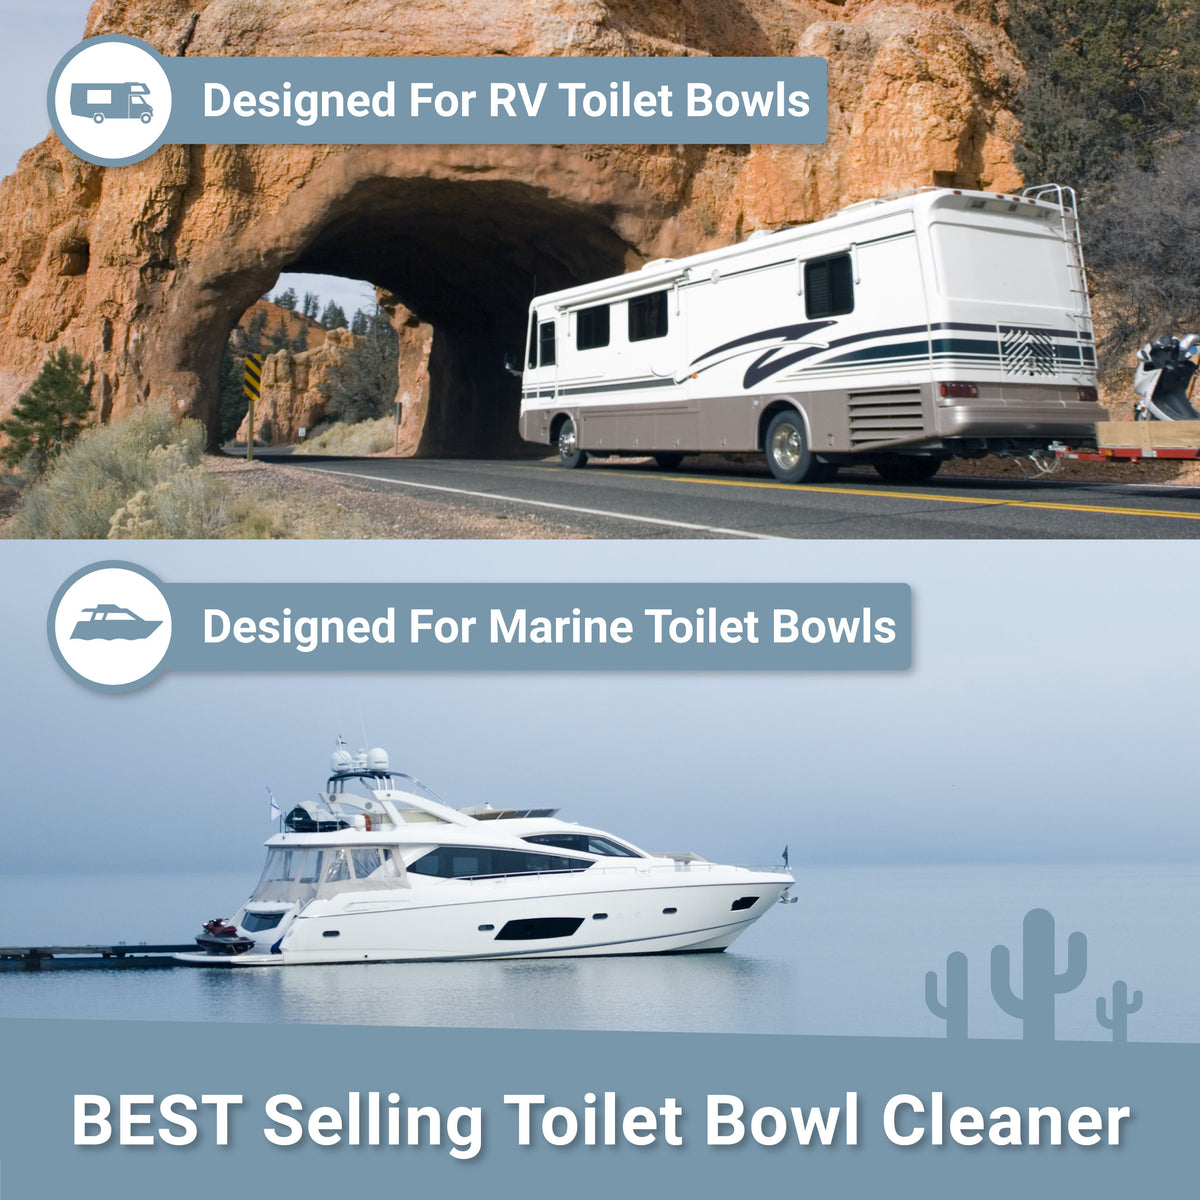 Best Selling RV Toilet Bowl Cleaner. Unique Camping + Marine